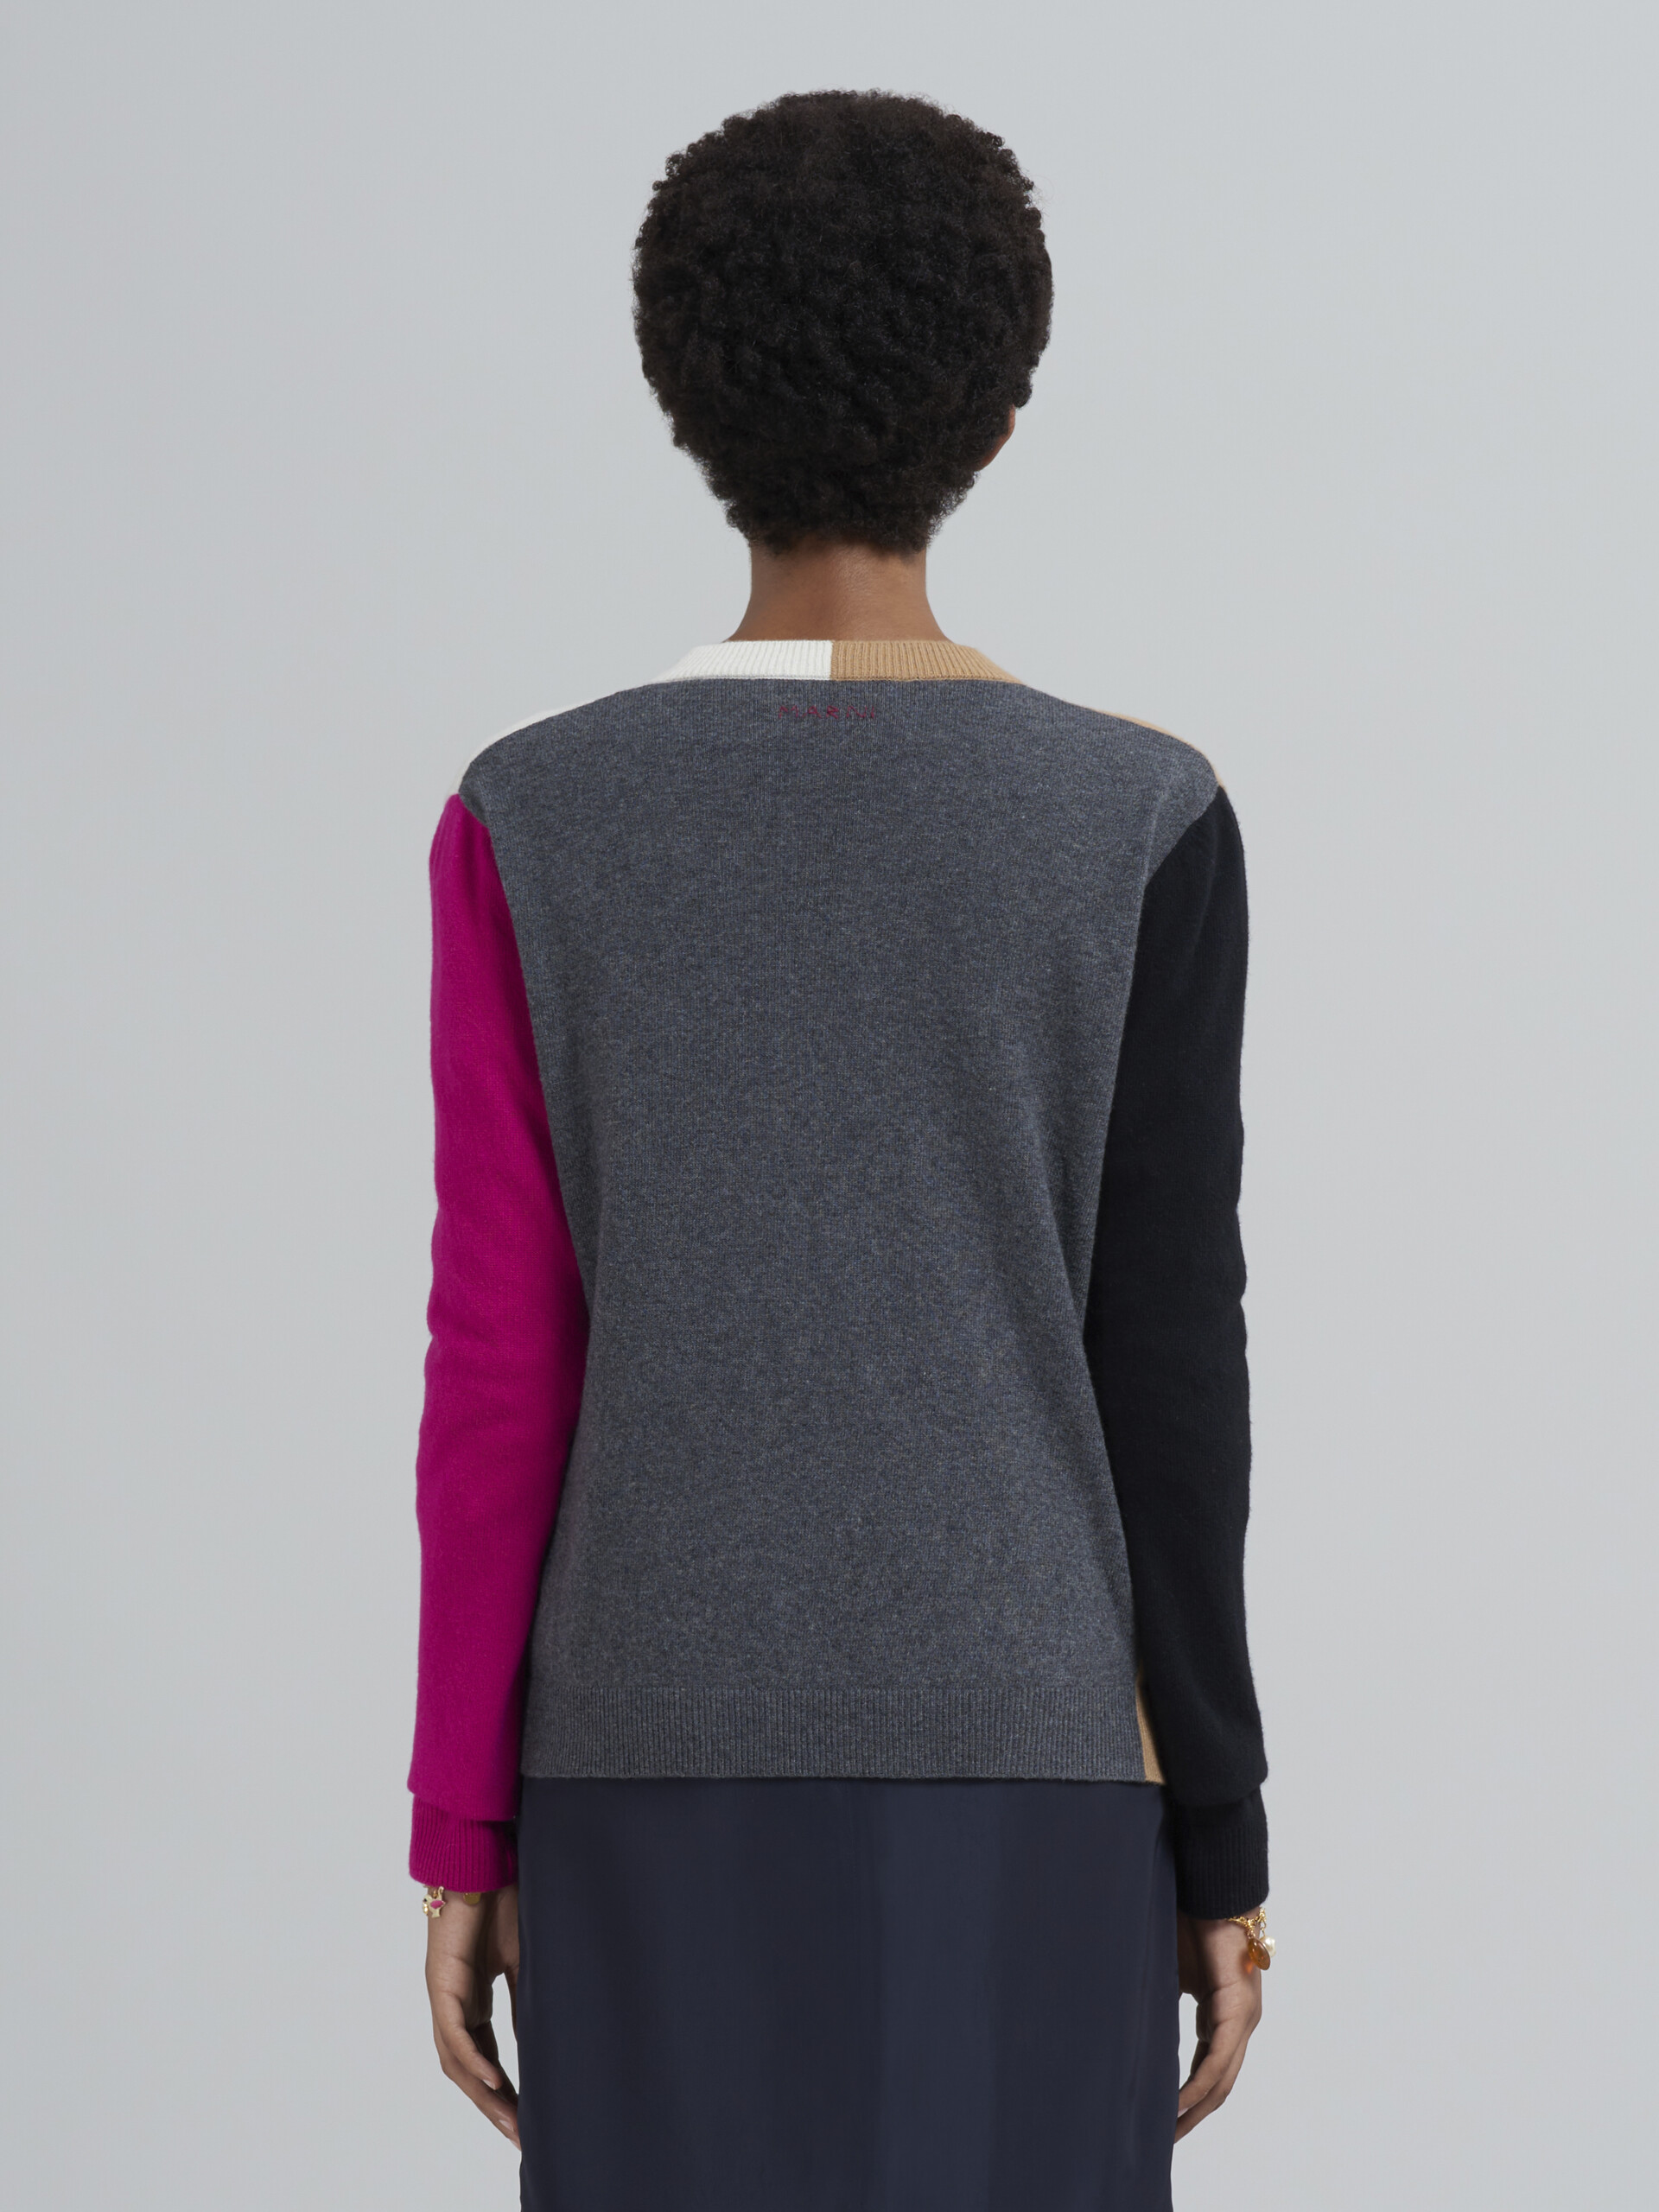 Colourblock wool and cashmere cardigan - Pullovers - Image 3